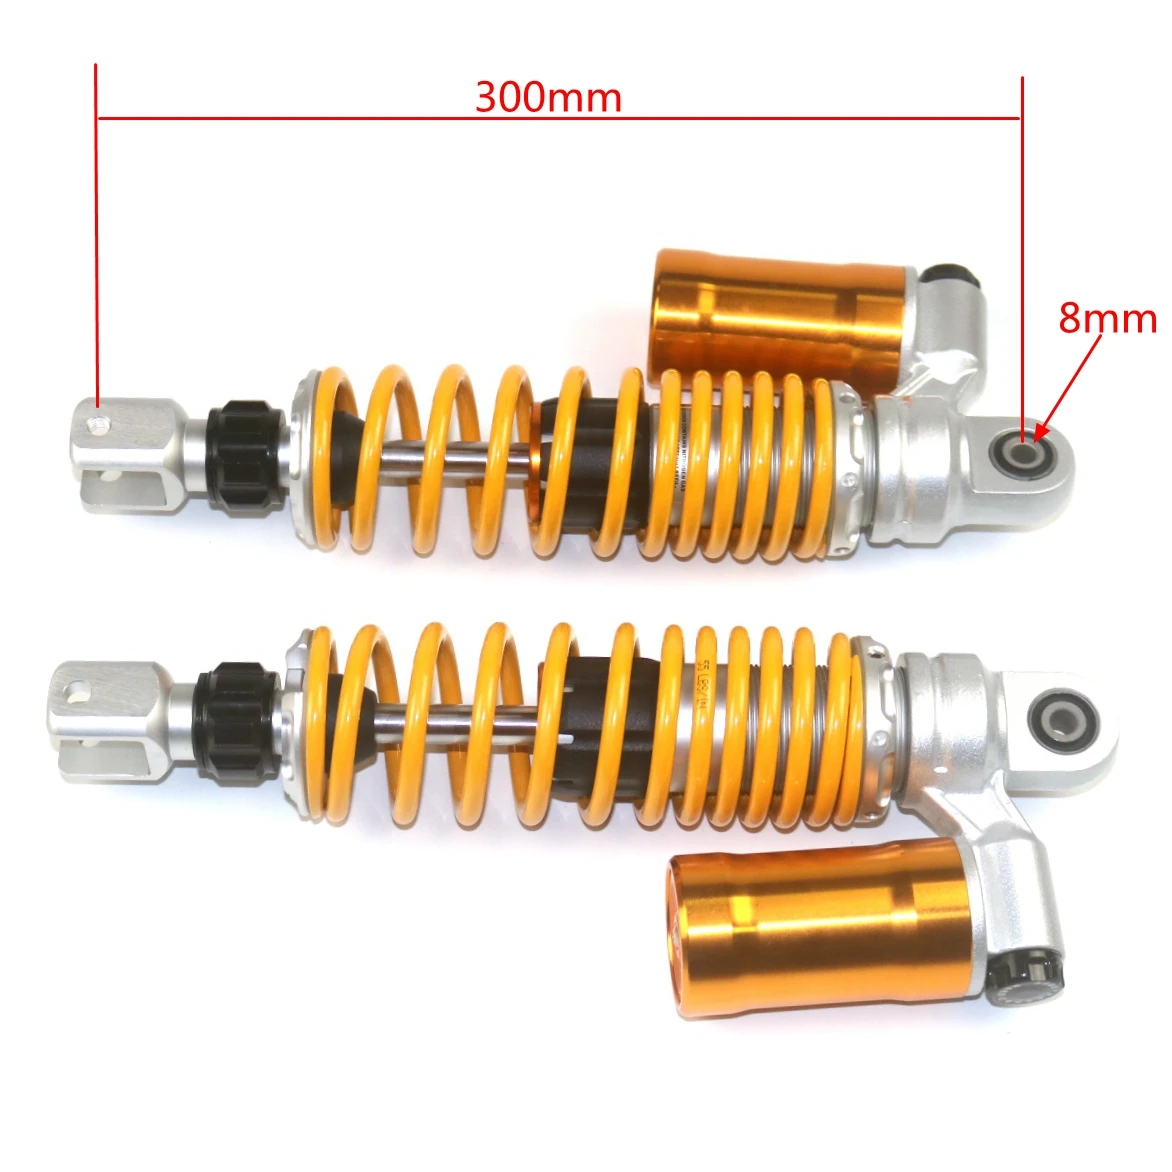 Motorcycle double damping adjustable Rear suspension shock absorber For YAMAHA NVX155/AEROX155  300mm